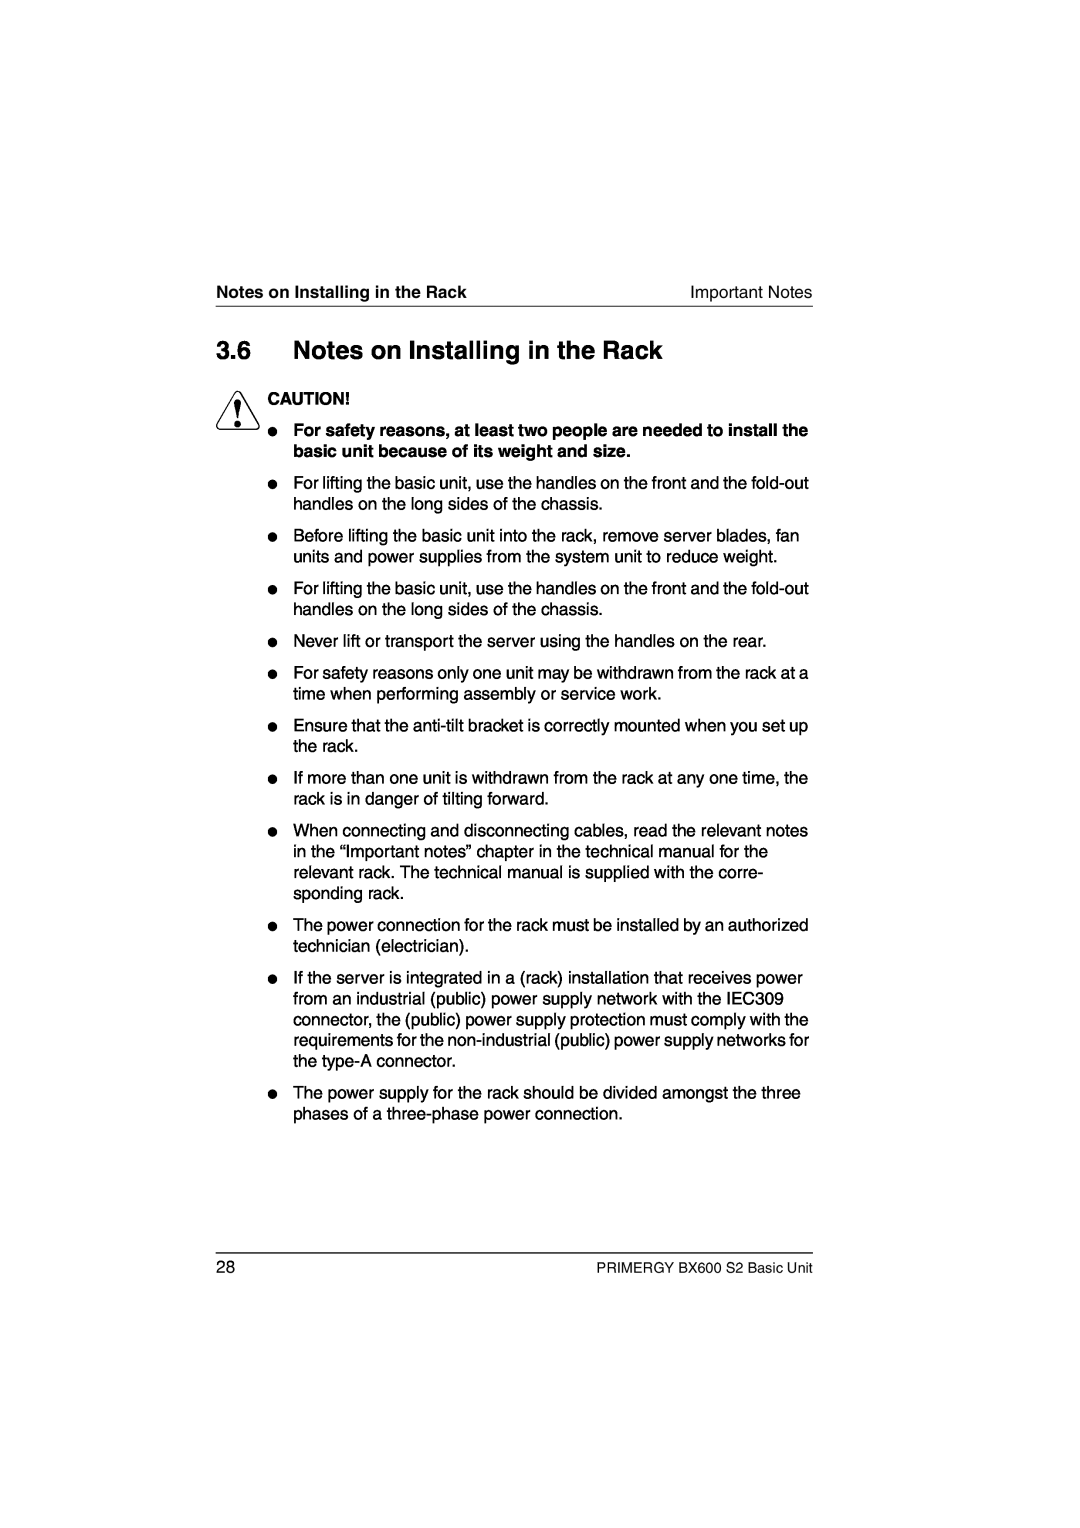 Fujitsu BX600 S2 manual Notes on Installing in the Rack, V Caution 